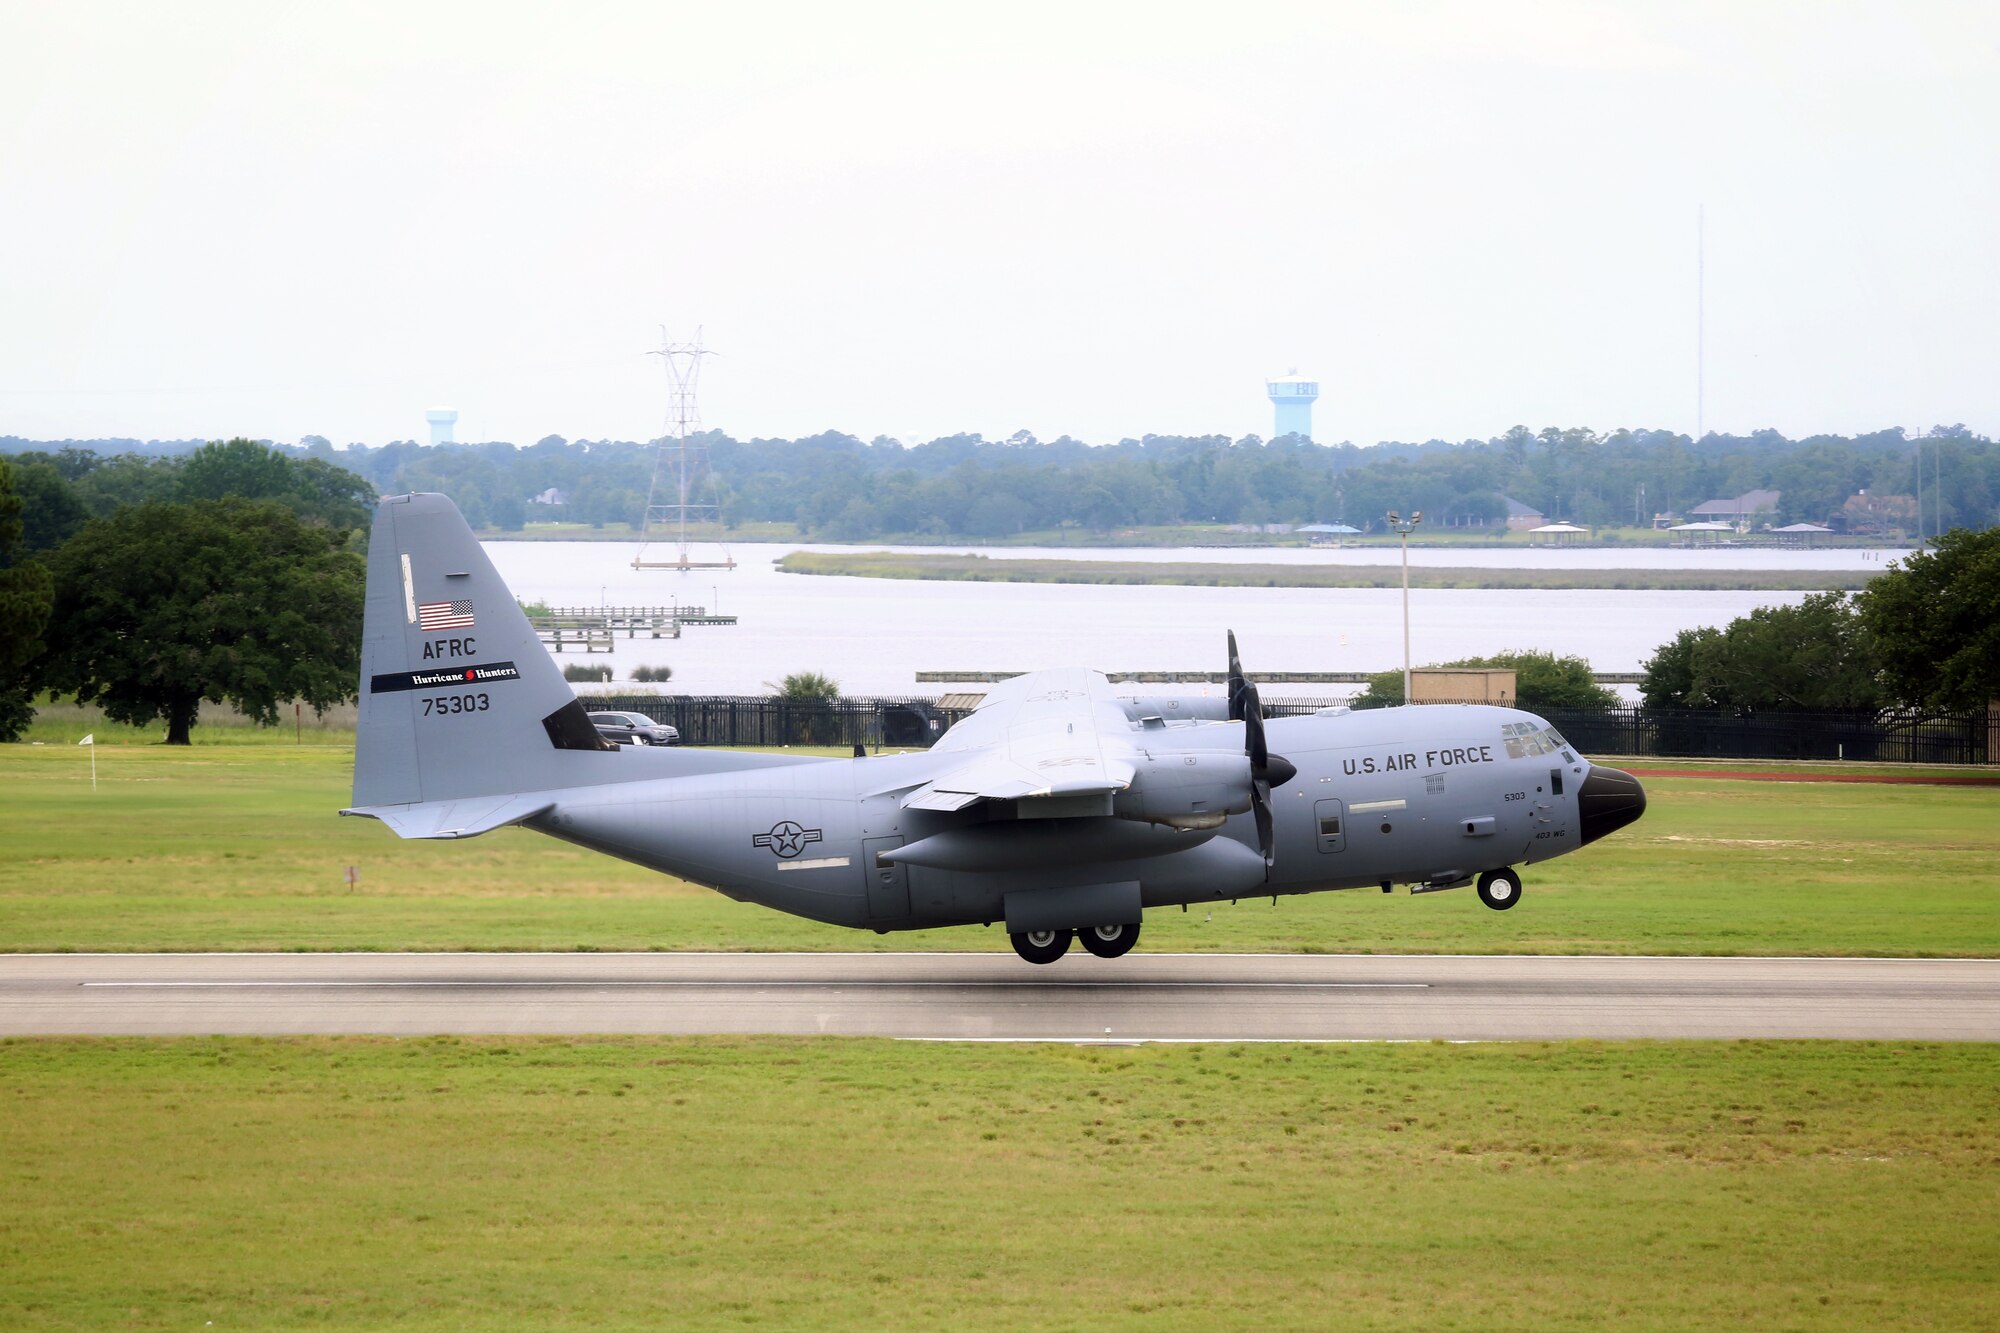 A WC-130J Super Hercules from the 53rd Weather Reconnaissance Squadron, aka Hurricane Hunters, takes off July 10, 2019 from Keesler Air Force Base, Mississippi. Tail number 75303 took off midday for an investigative flight into a tropical depression over the Gulf of Mexico. (Courtesy photo)